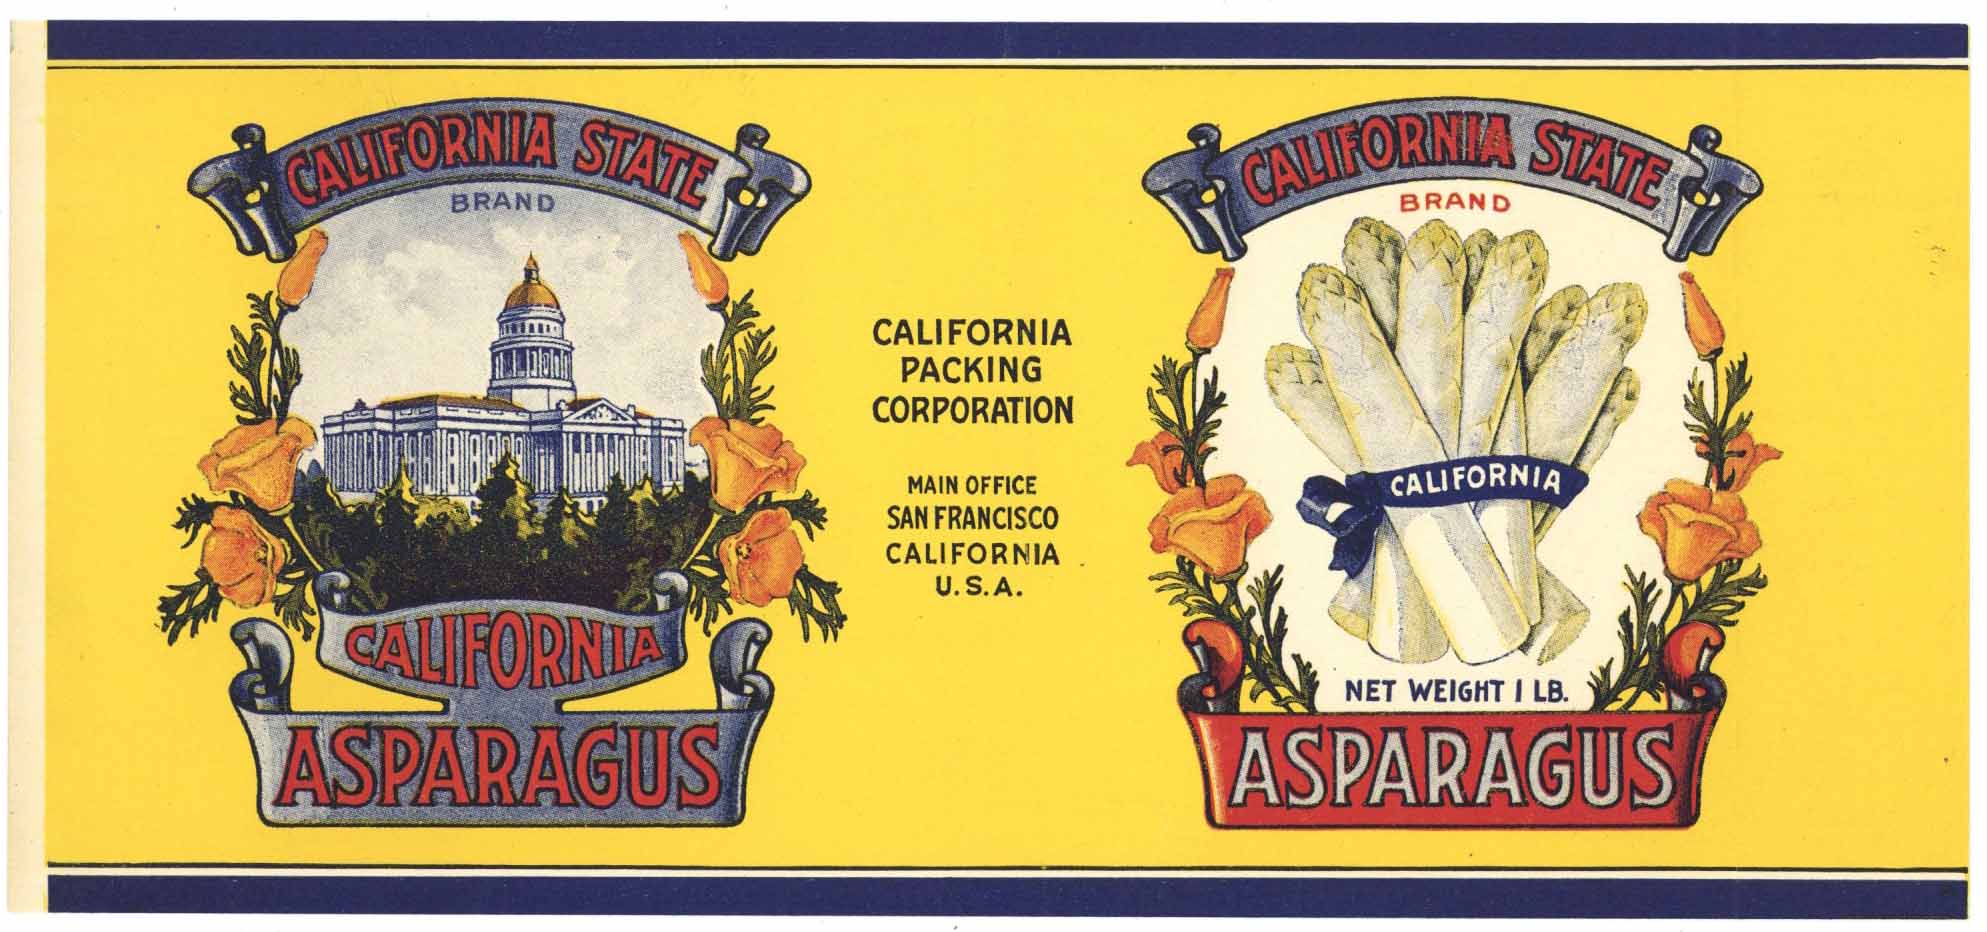 California State Brand Vintage Asparagus Can Label